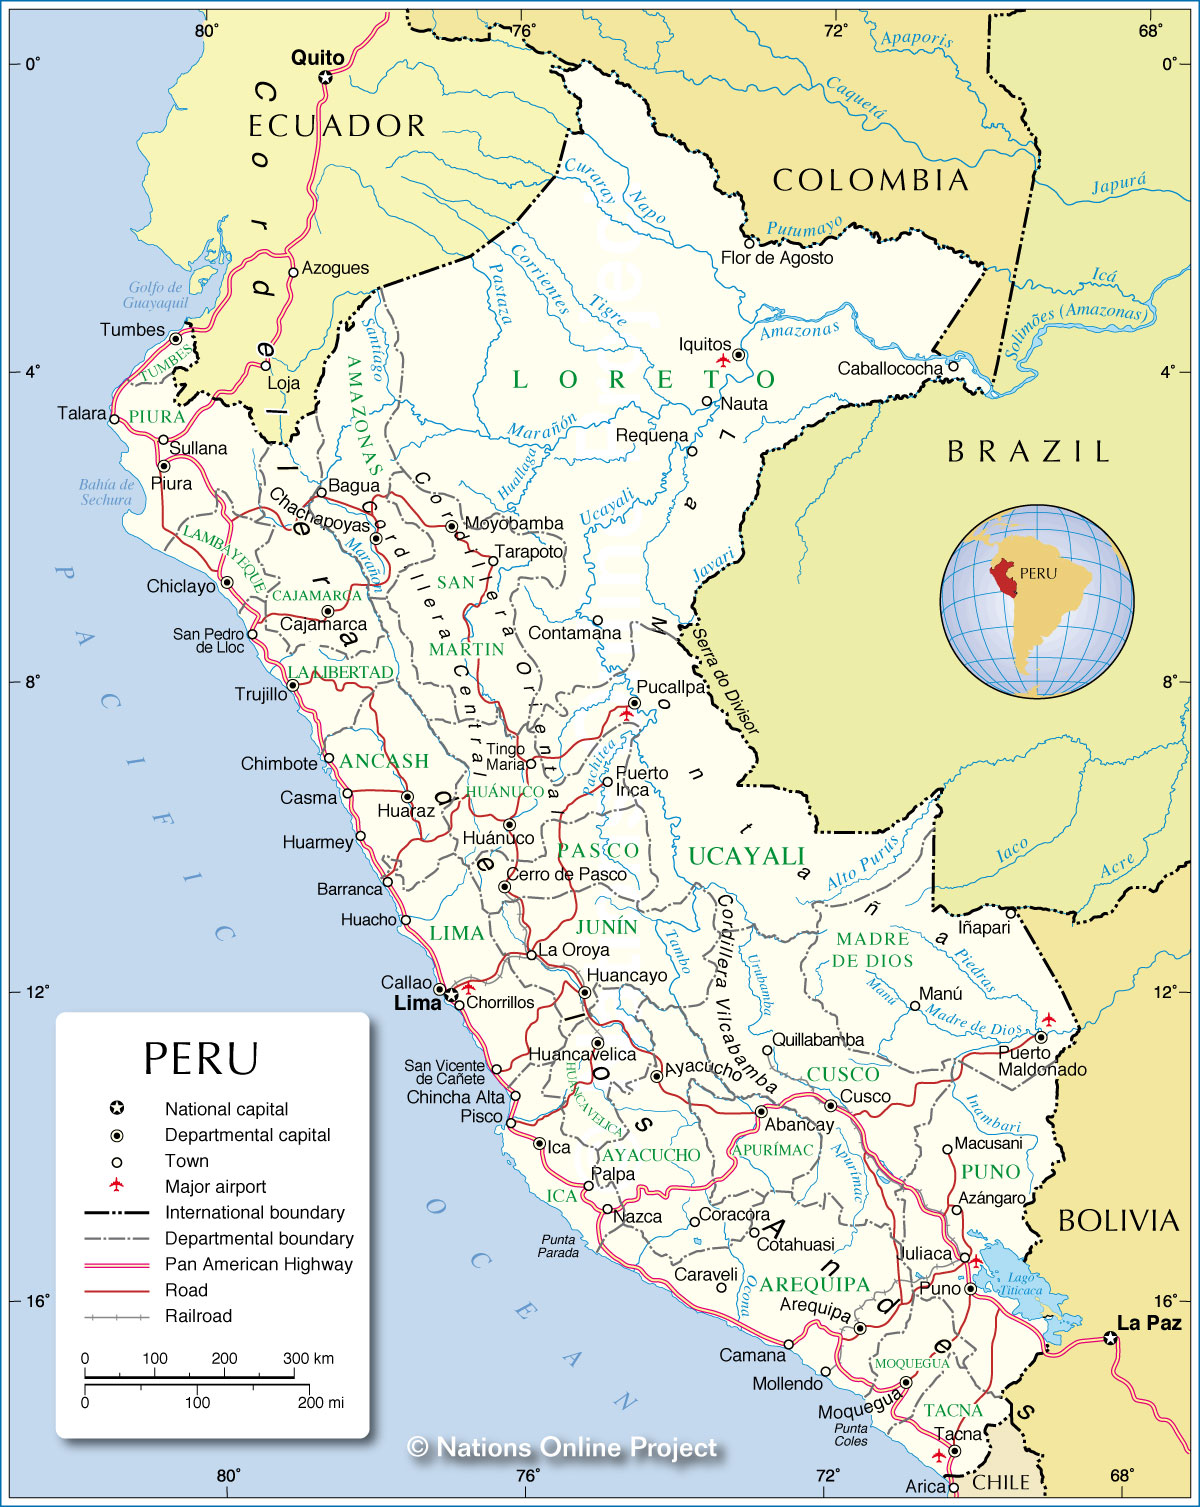 Administrative Map of Peru - Nations Online Project